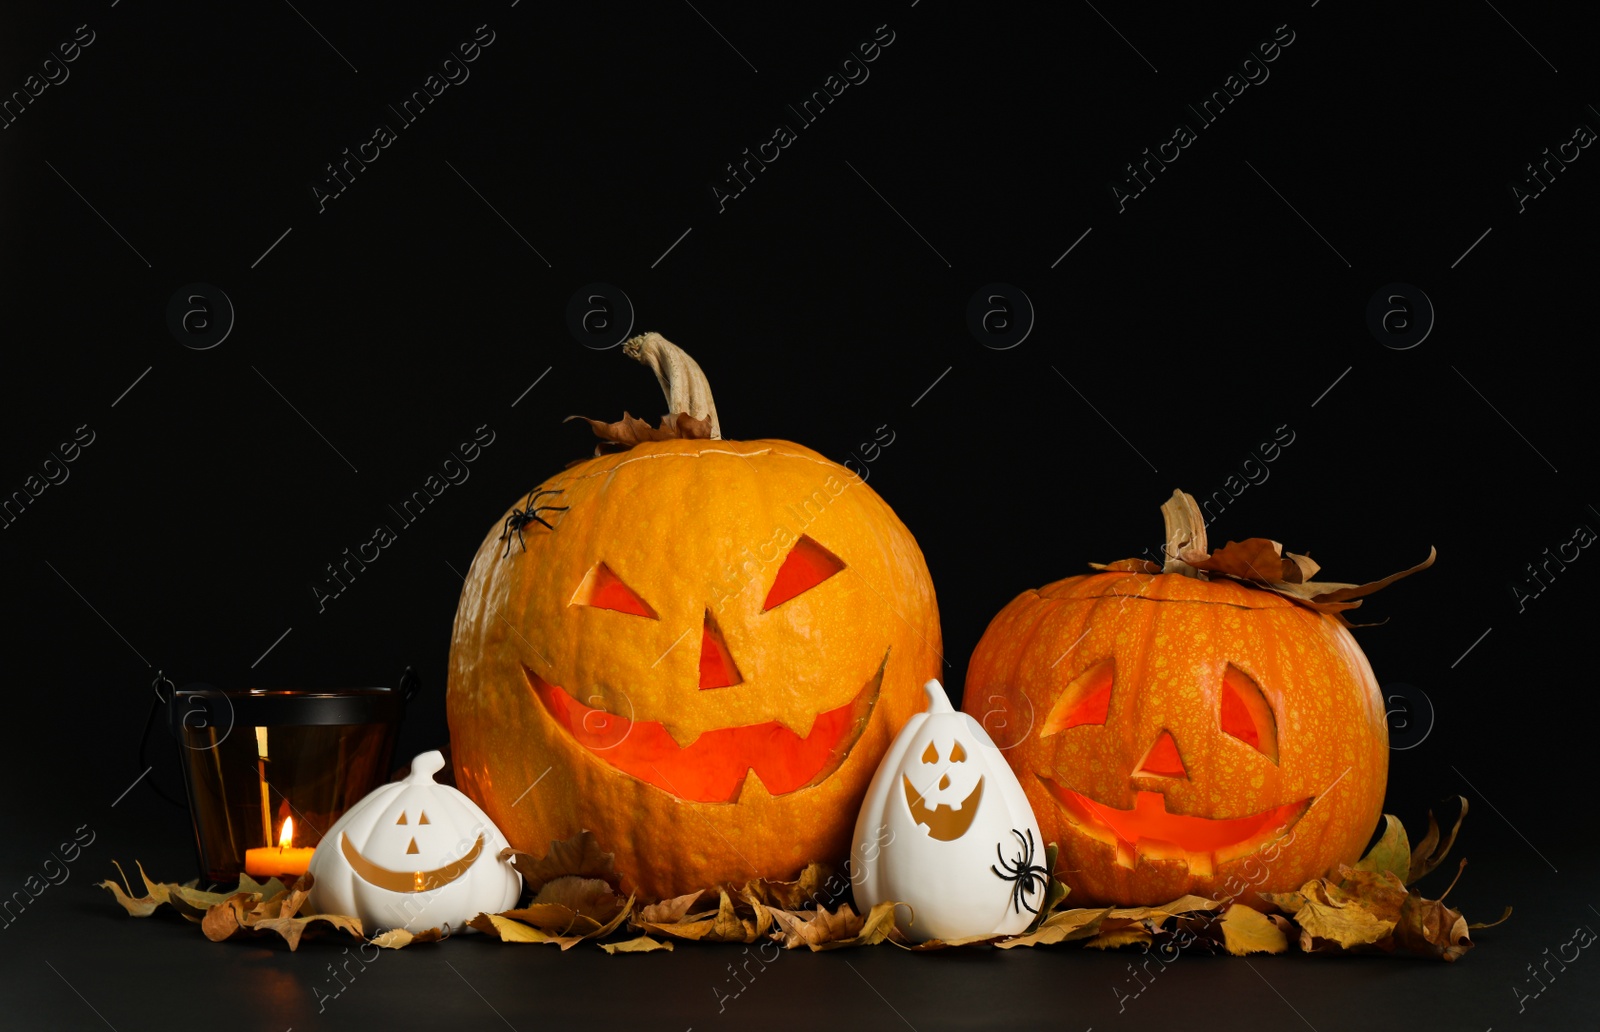 Photo of Composition with pumpkin heads on black background. Jack lantern - traditional Halloween decor